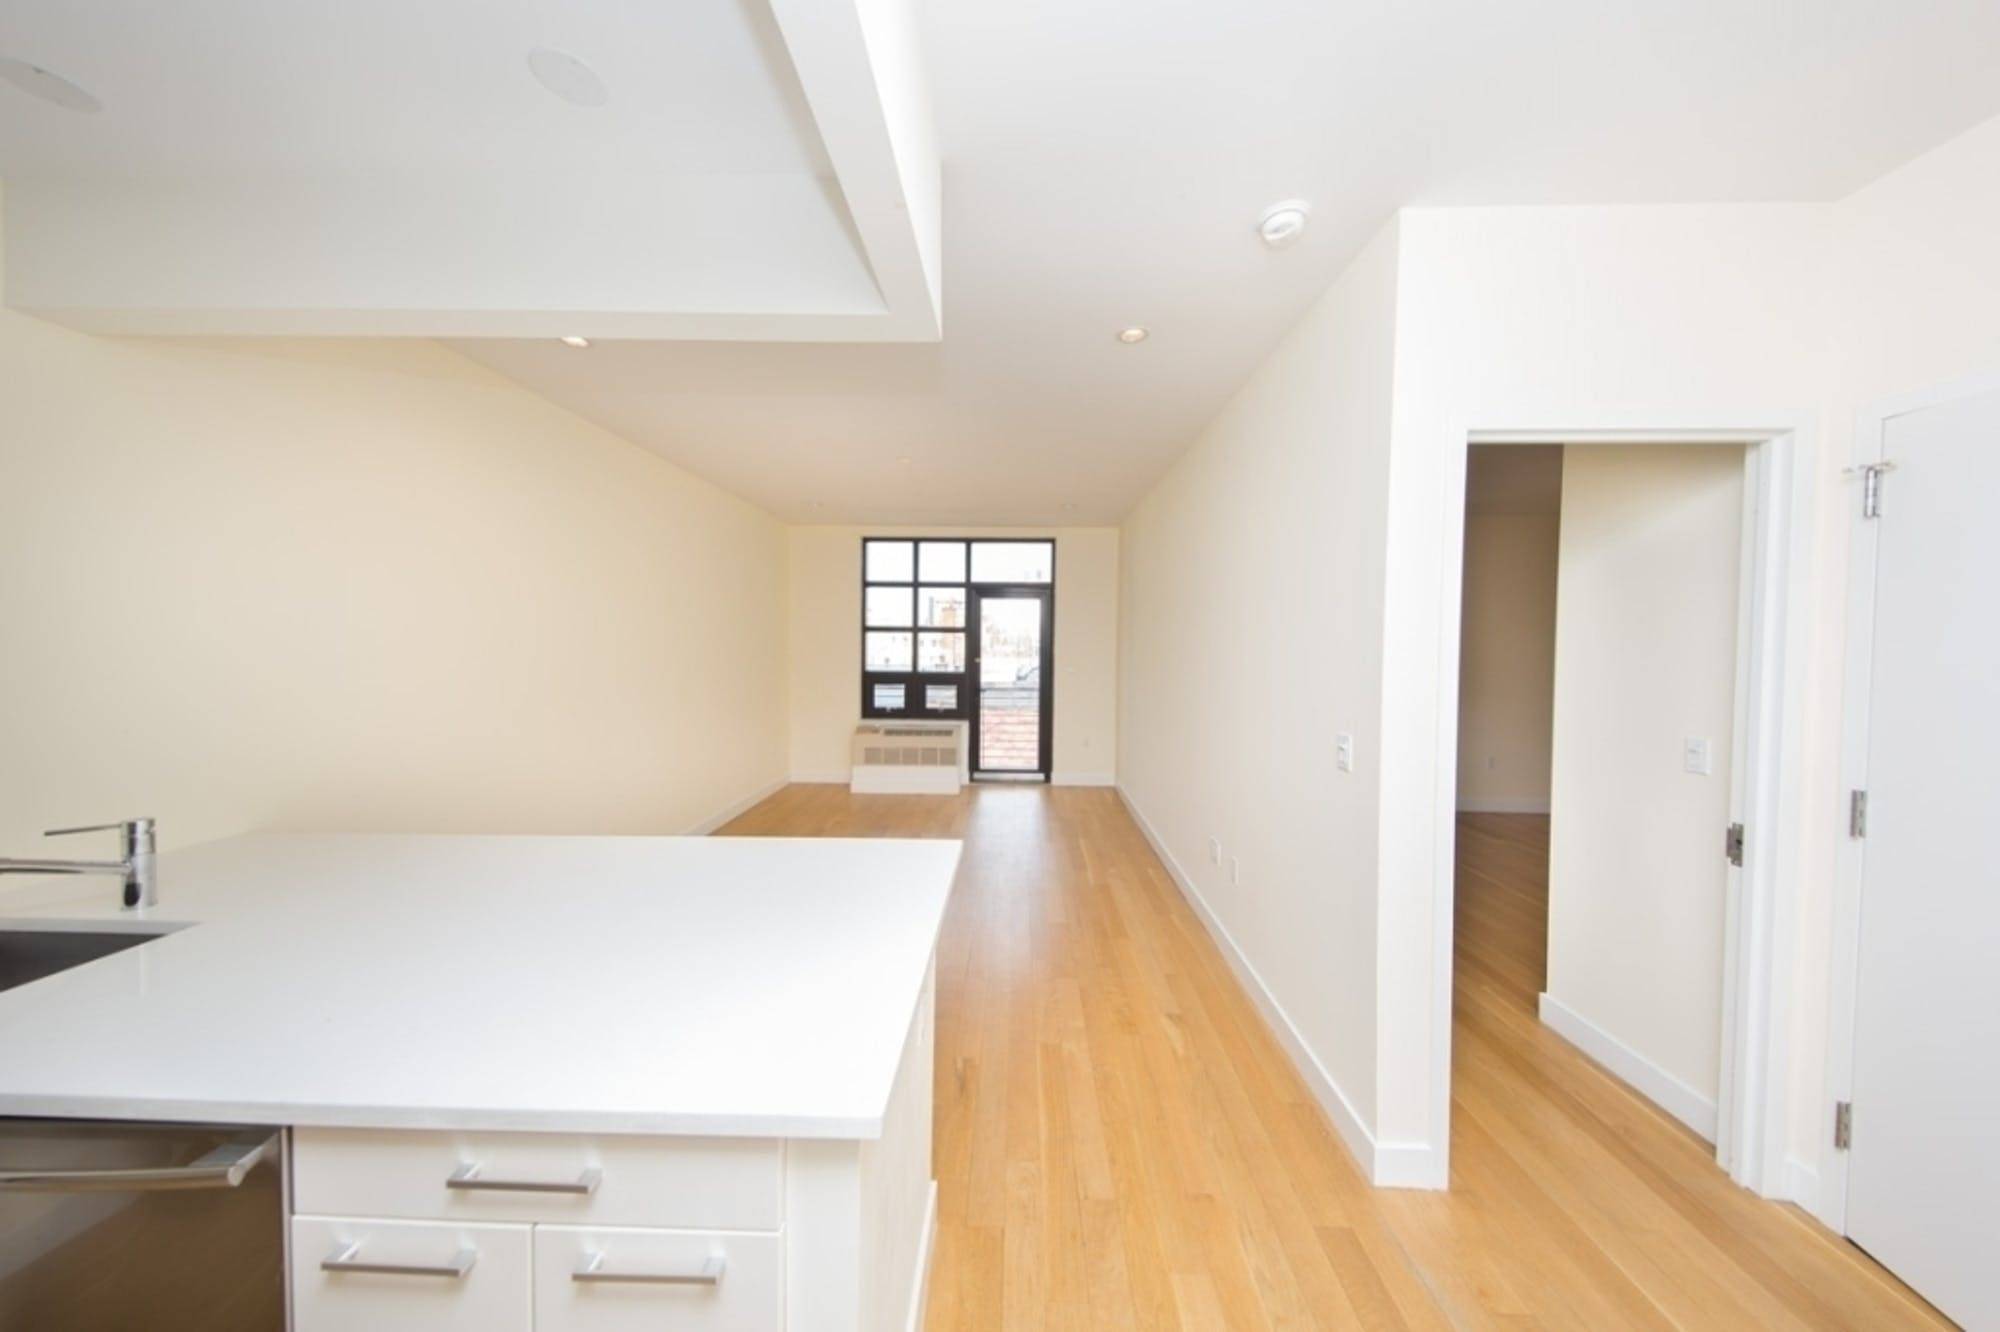 Two Months Free 2979 net, 3575 gross Welcome to 65 N 6th Street Located in the beating heart of North Williamsburg, 65 N 6th is a warehouse inspired rental residence ...